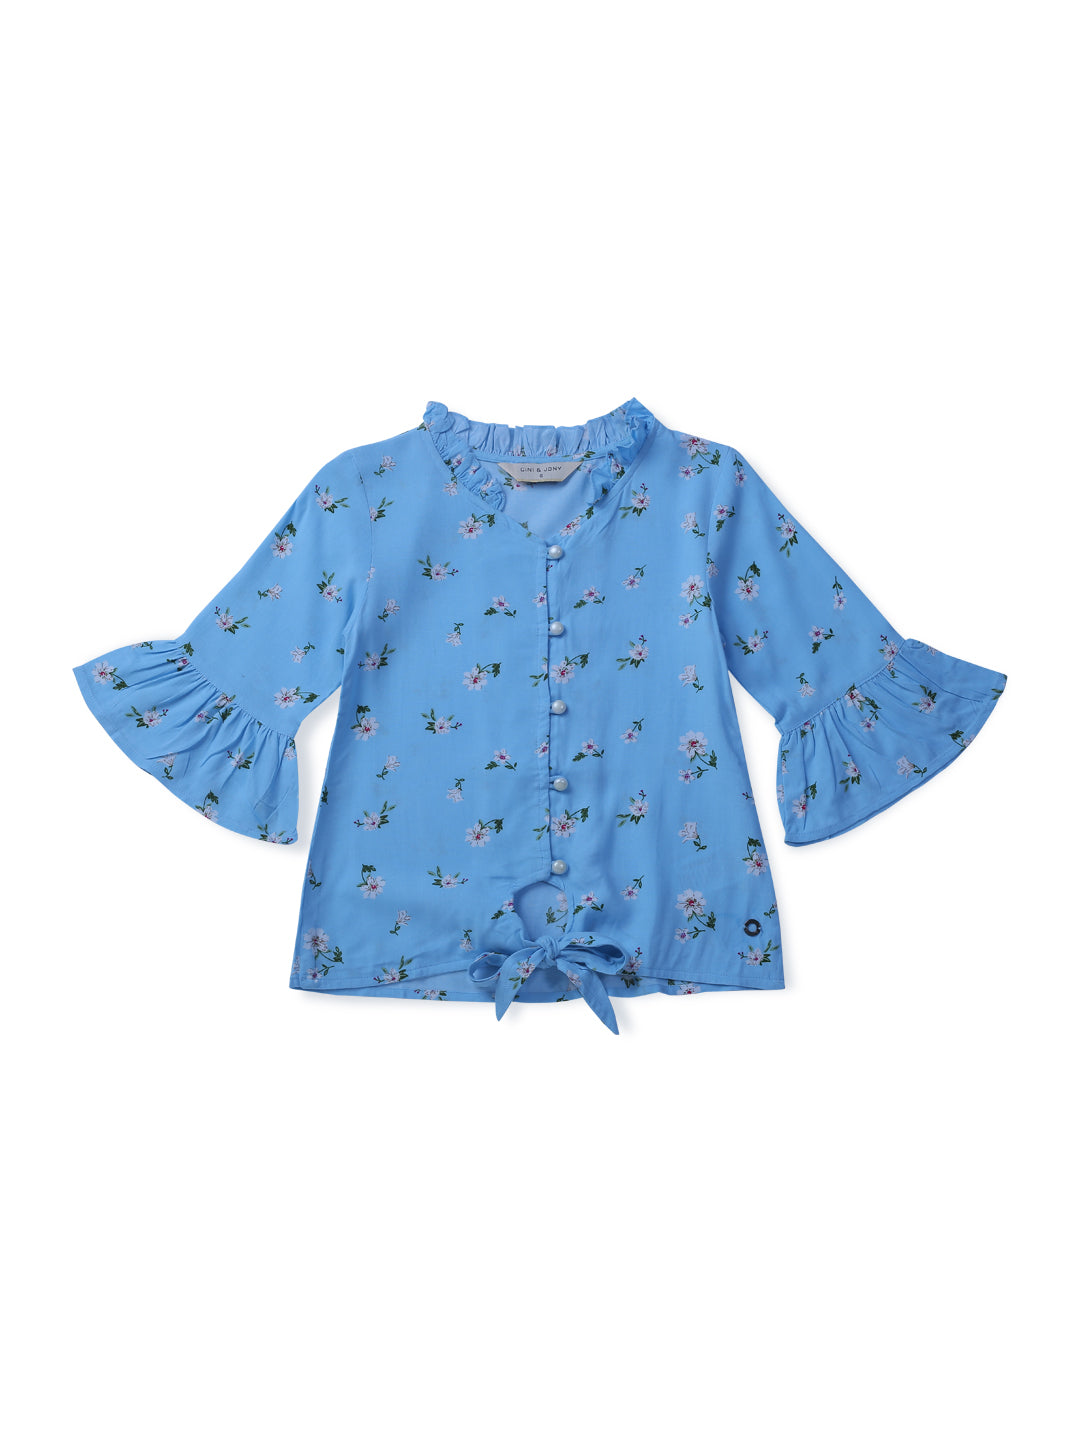 Girls Blue Printed Cotton Woven Top